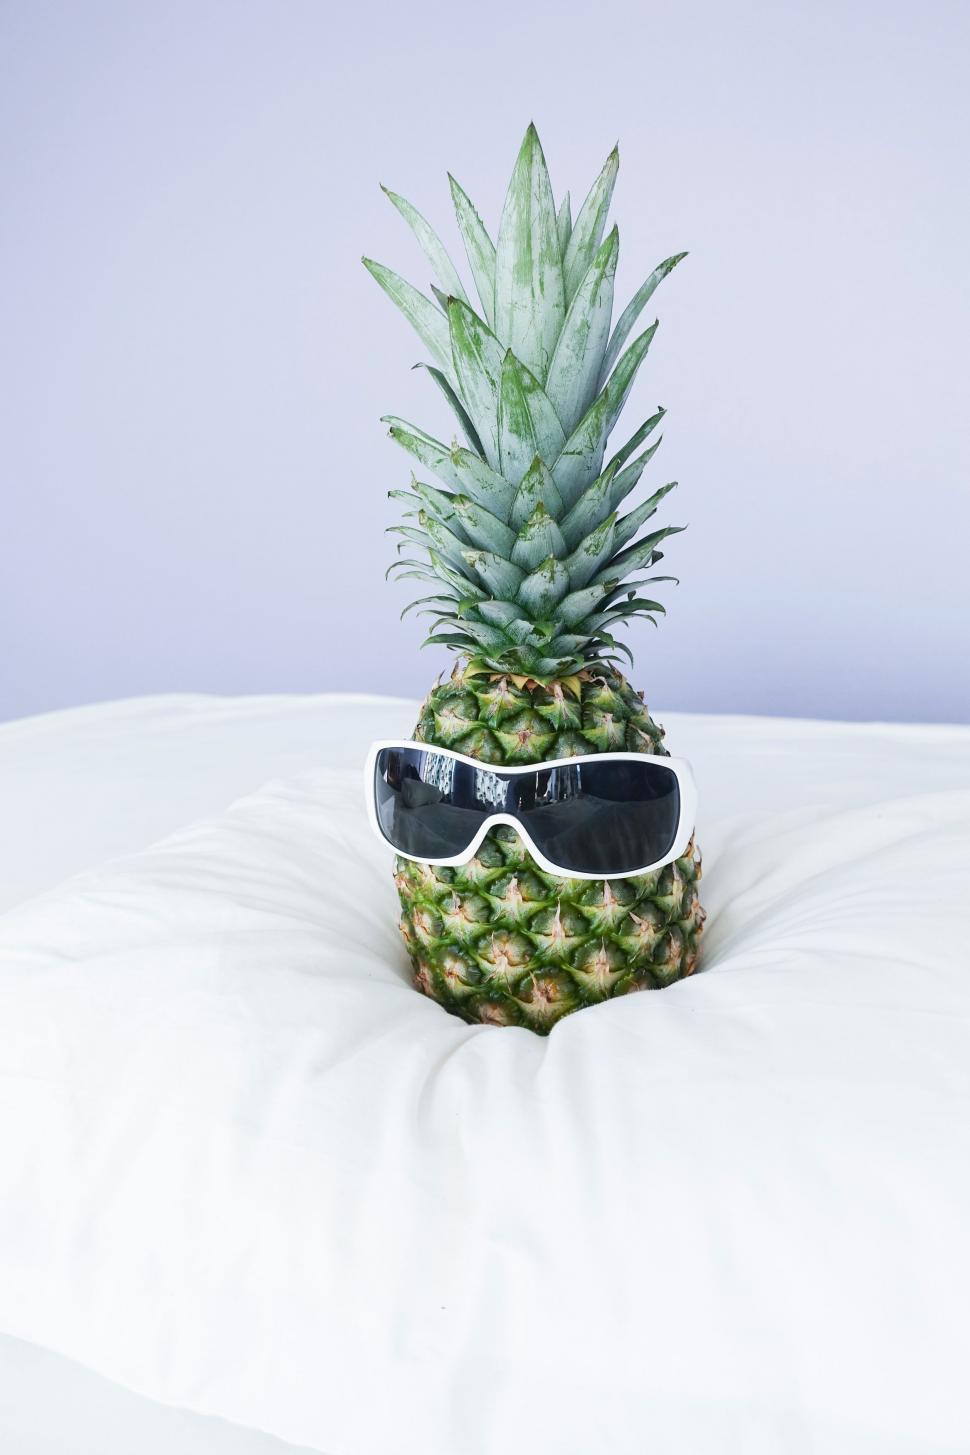 Free Image of Pineapple Wearing Sunglasses on Bed 